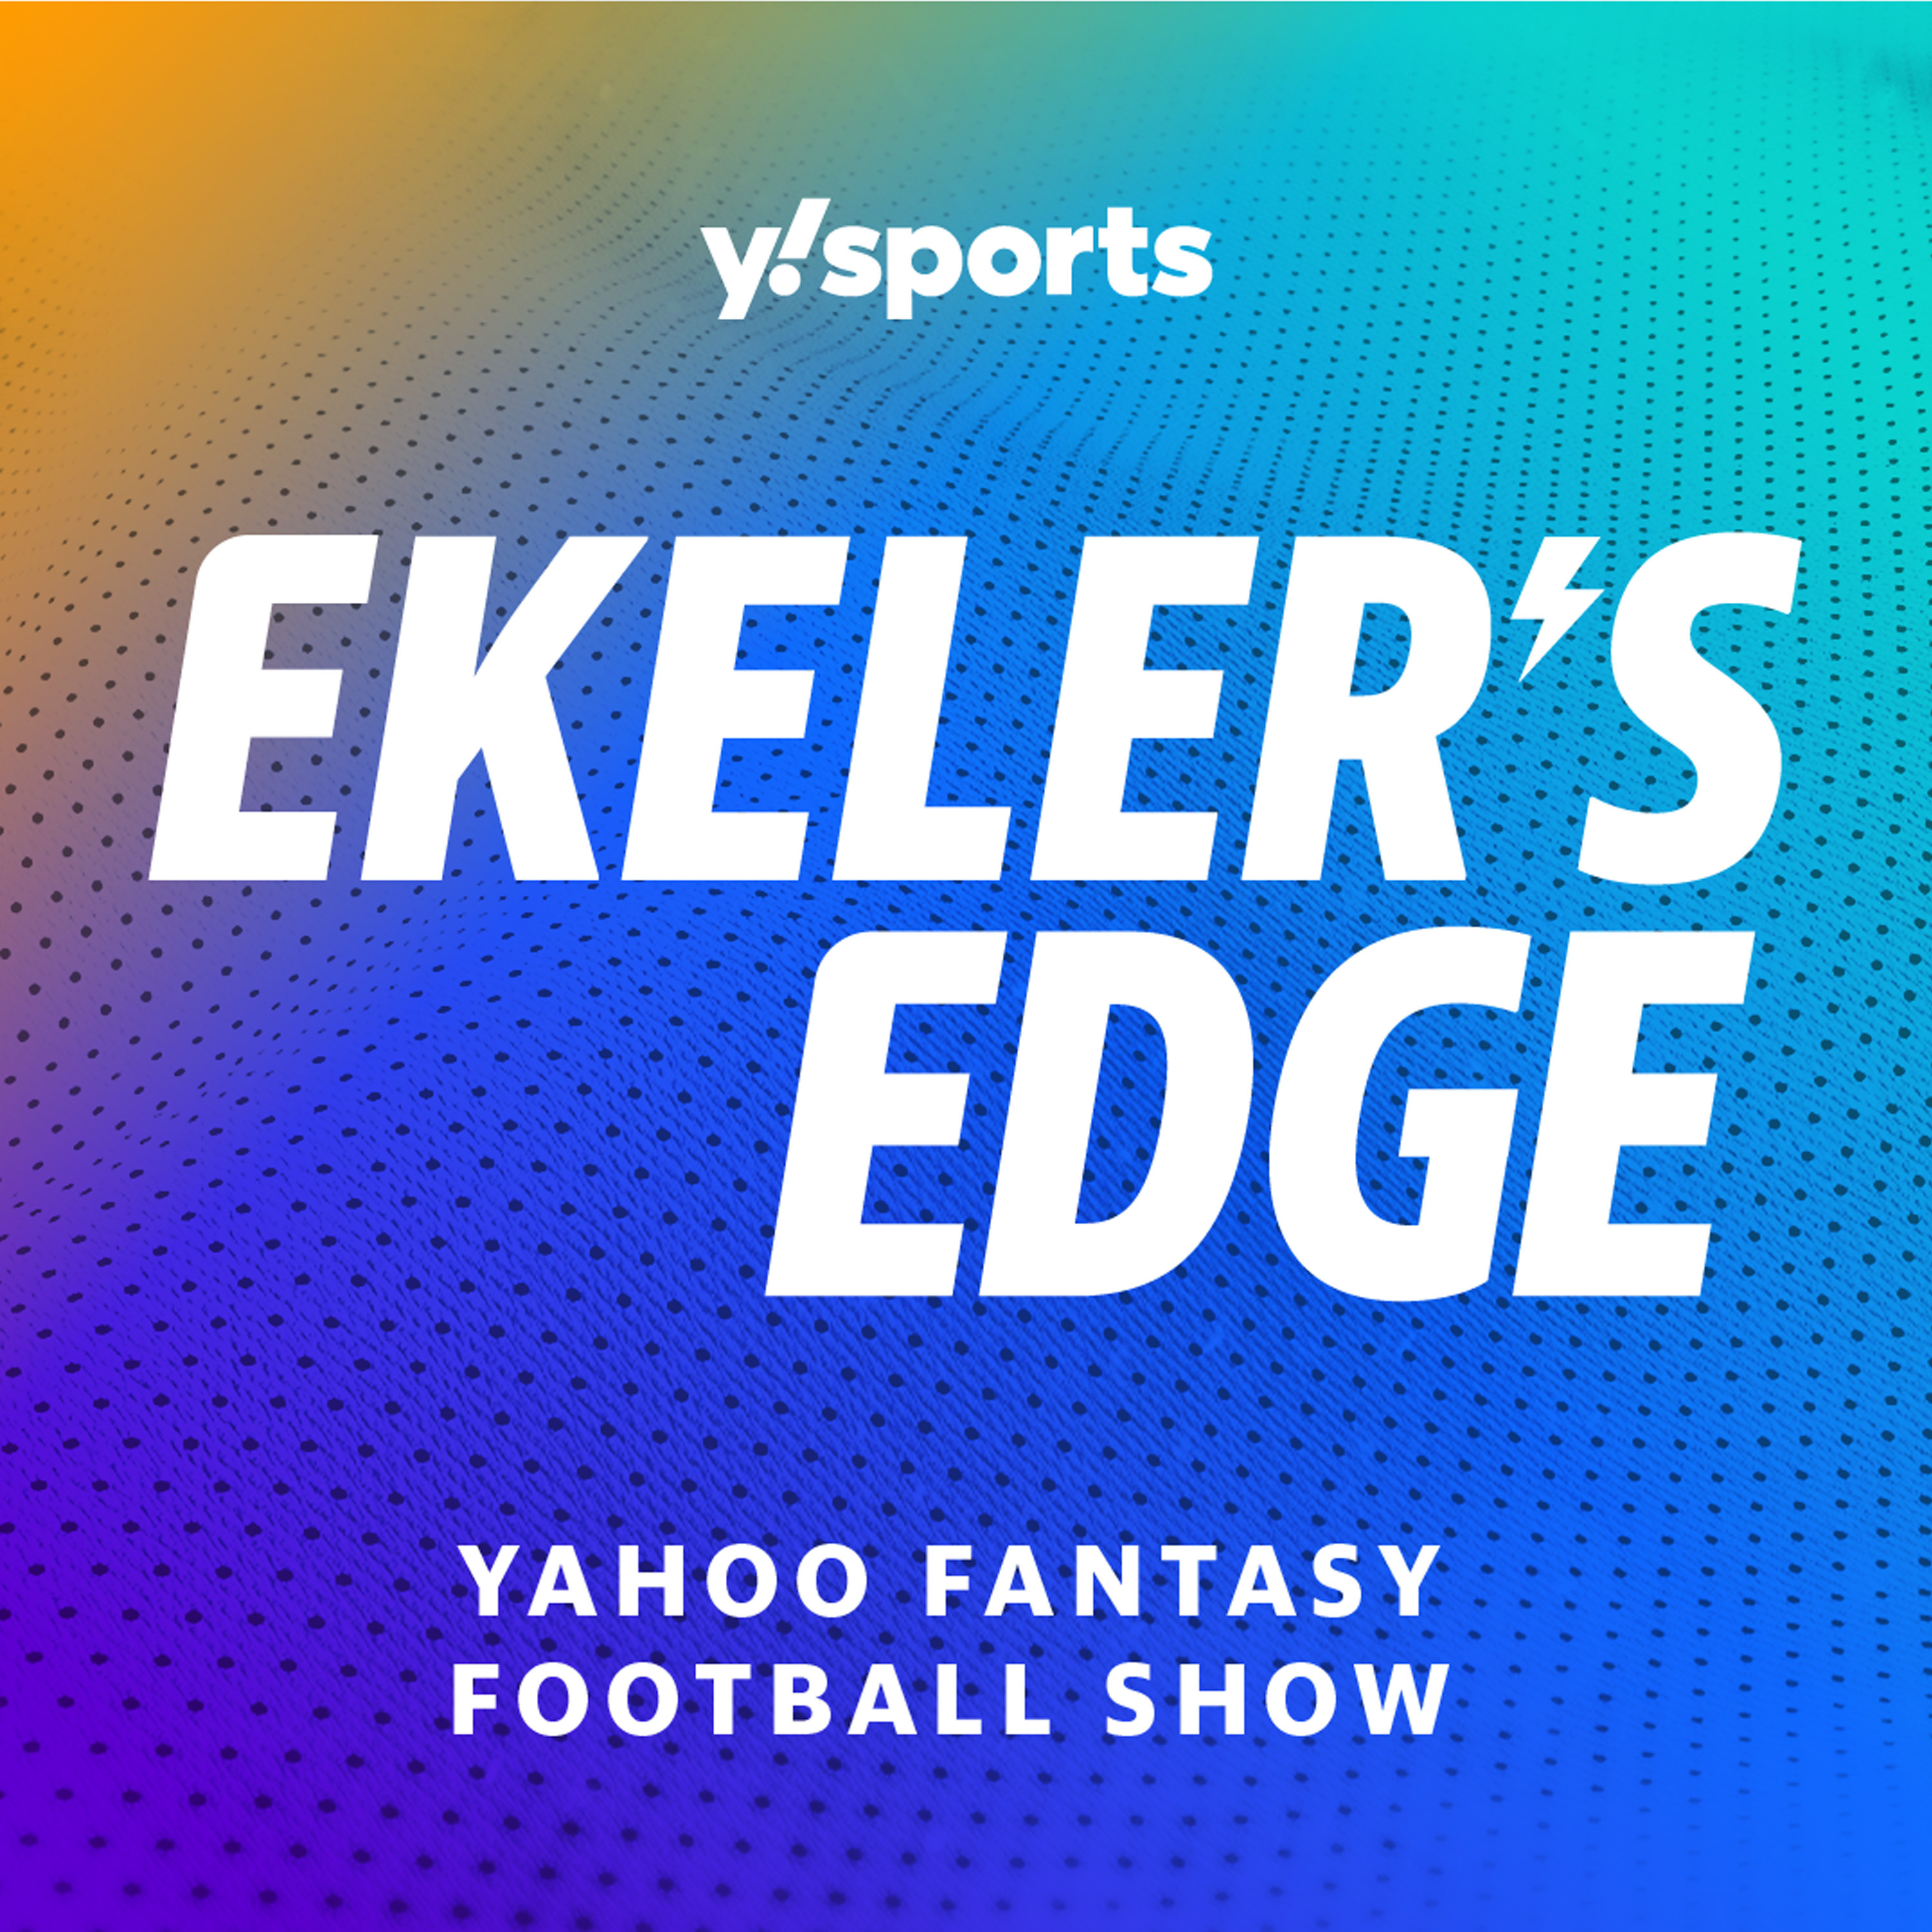 Ekeler's Edge at the Super Bowl: Austin reacts to Eyebrowgate + his future in NFL